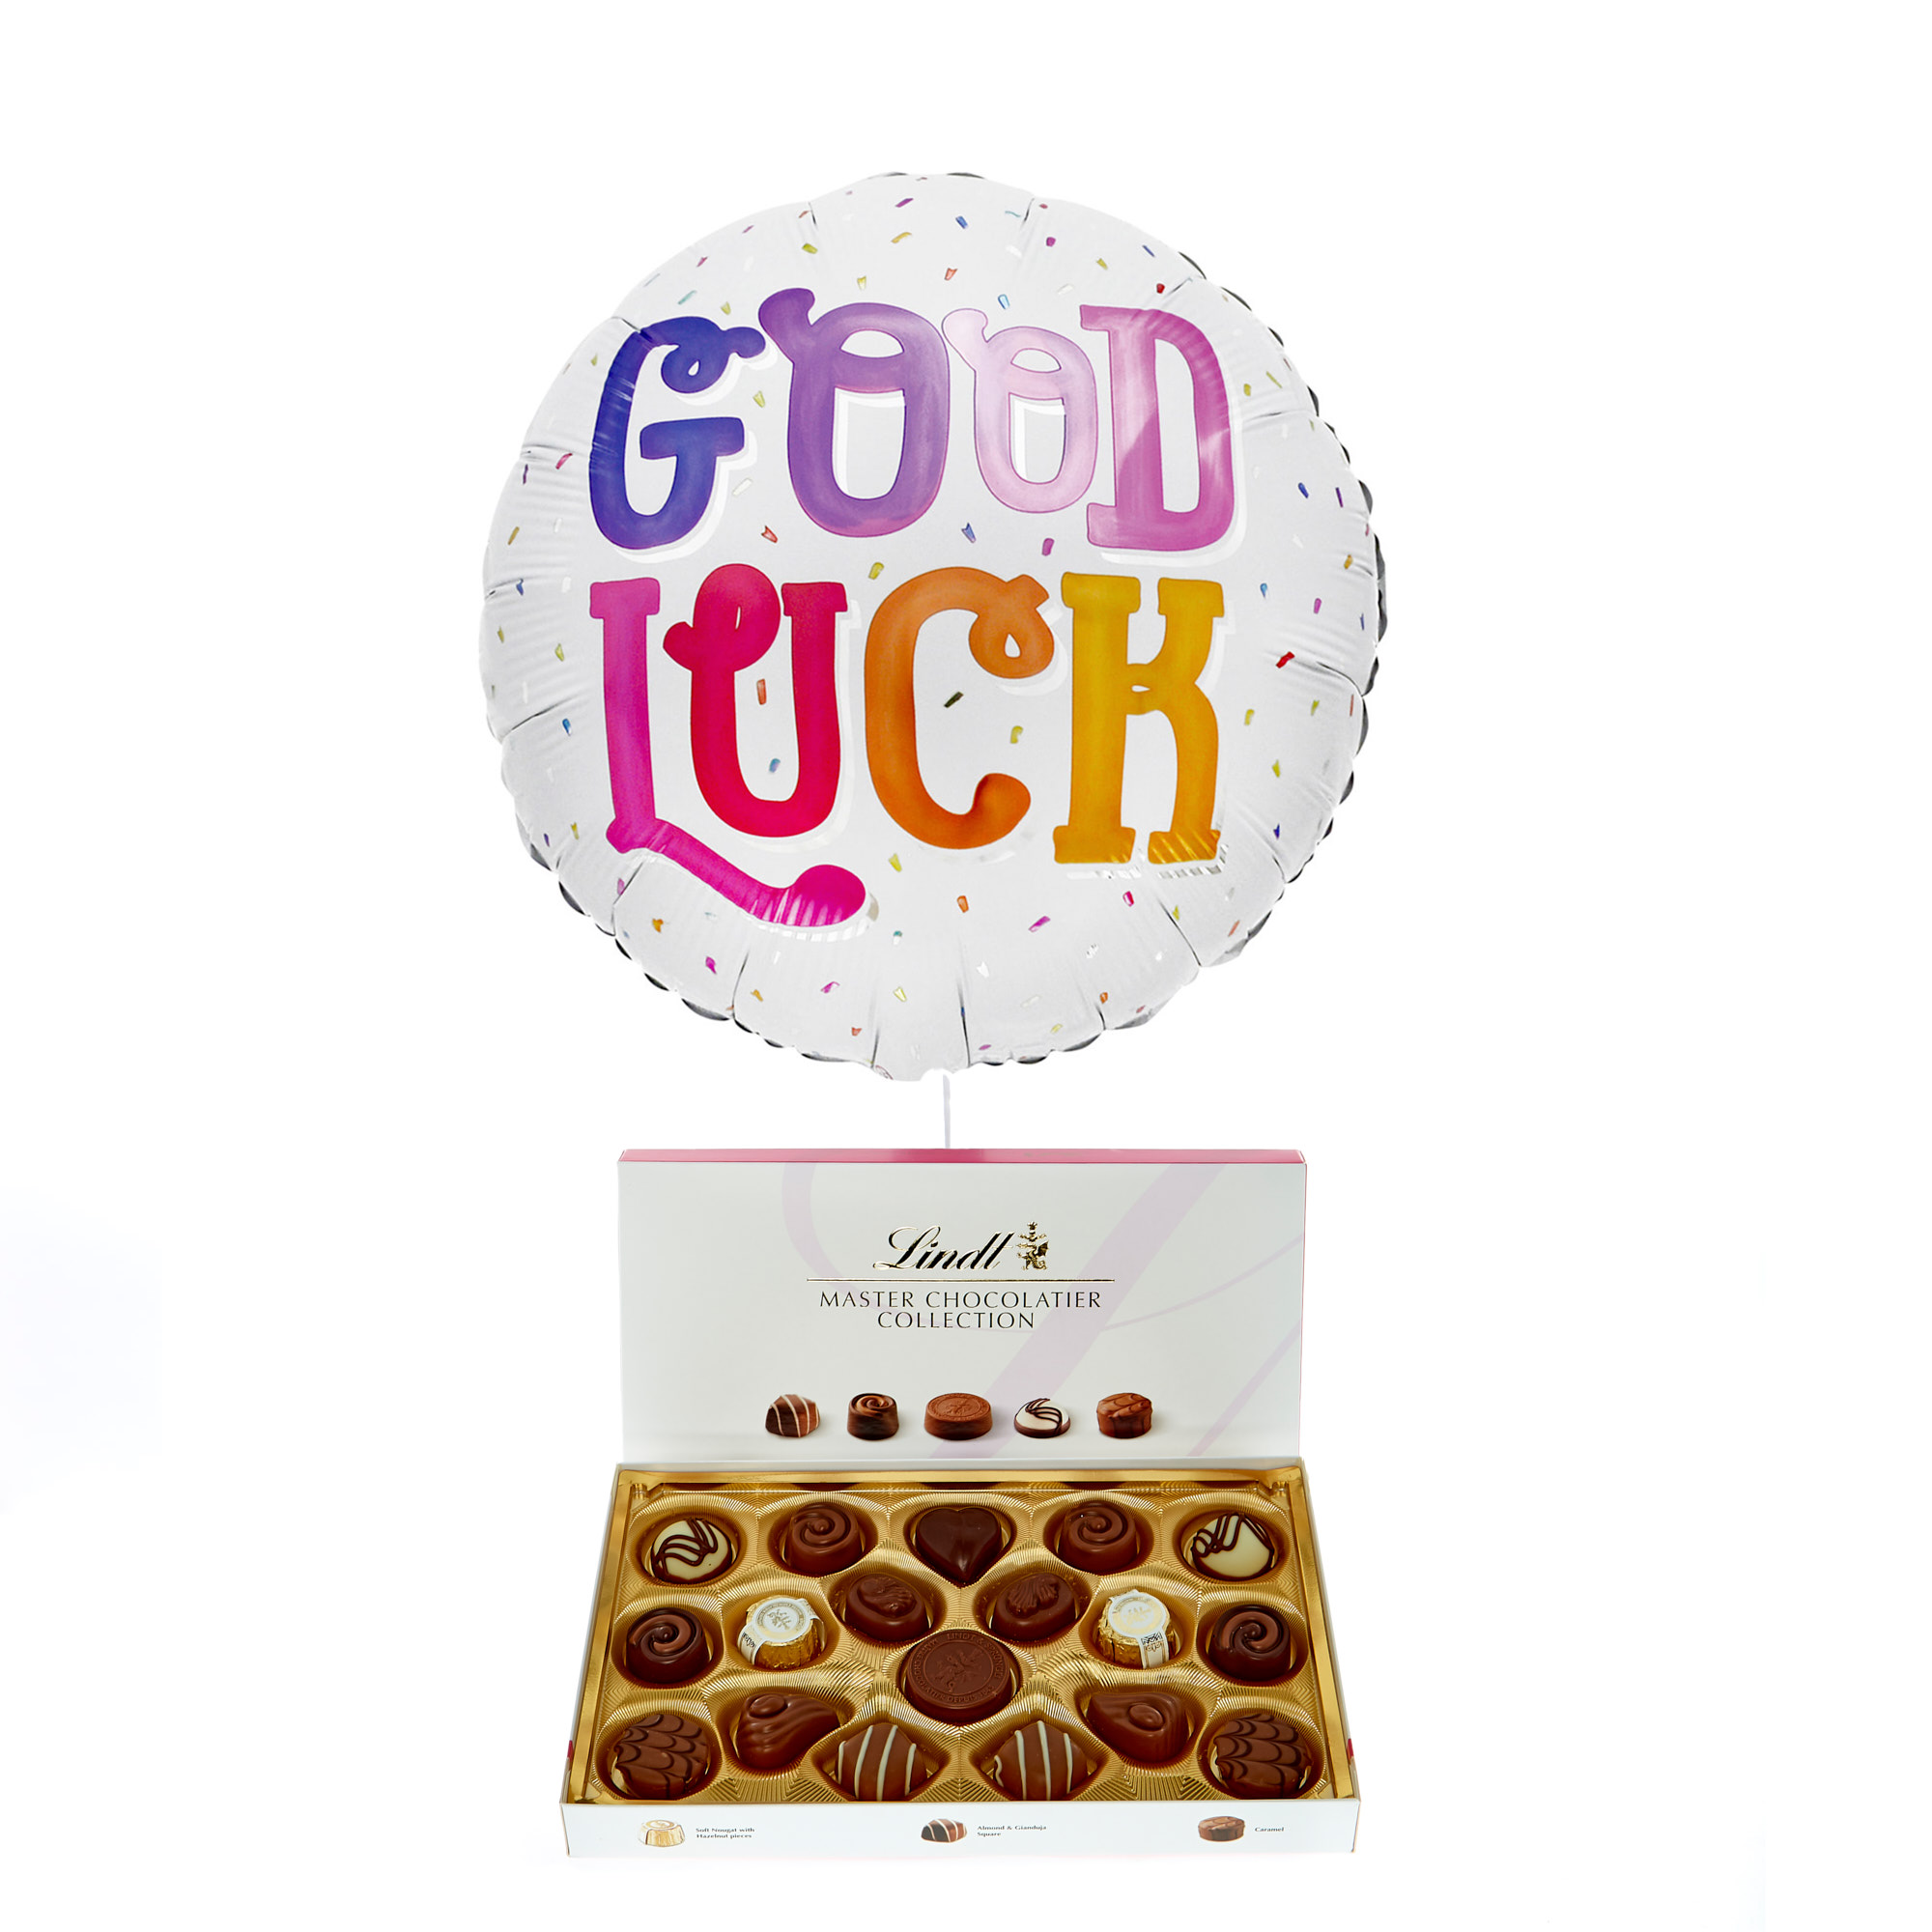 Colourful Good Luck Balloon & Lindt Chocolates - FREE GIFT CARD!